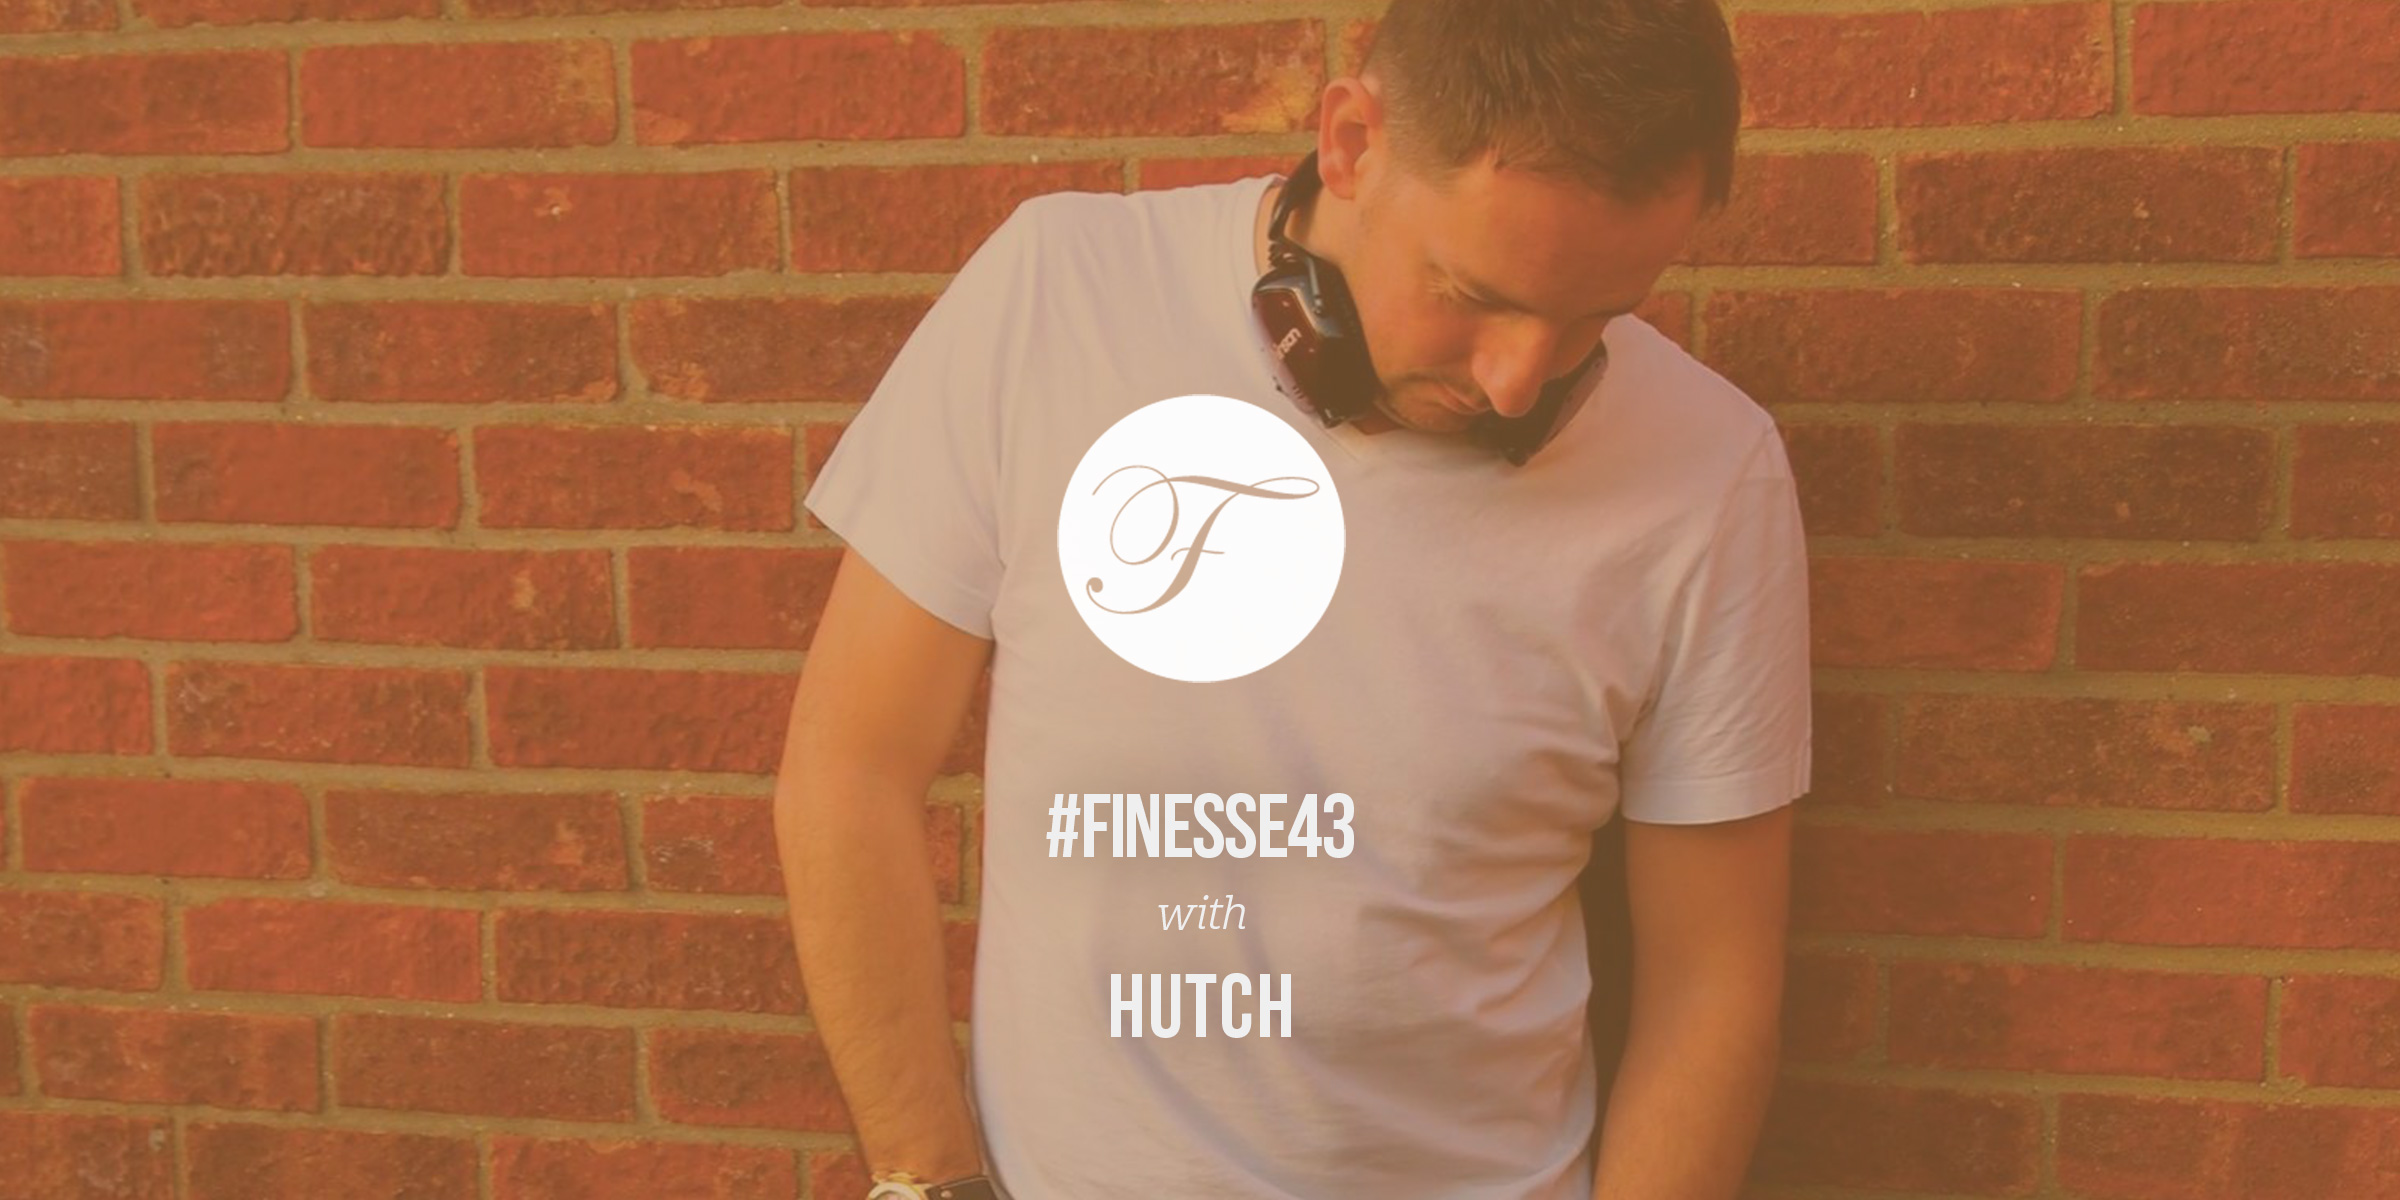 House Finesse 43 with Hutch